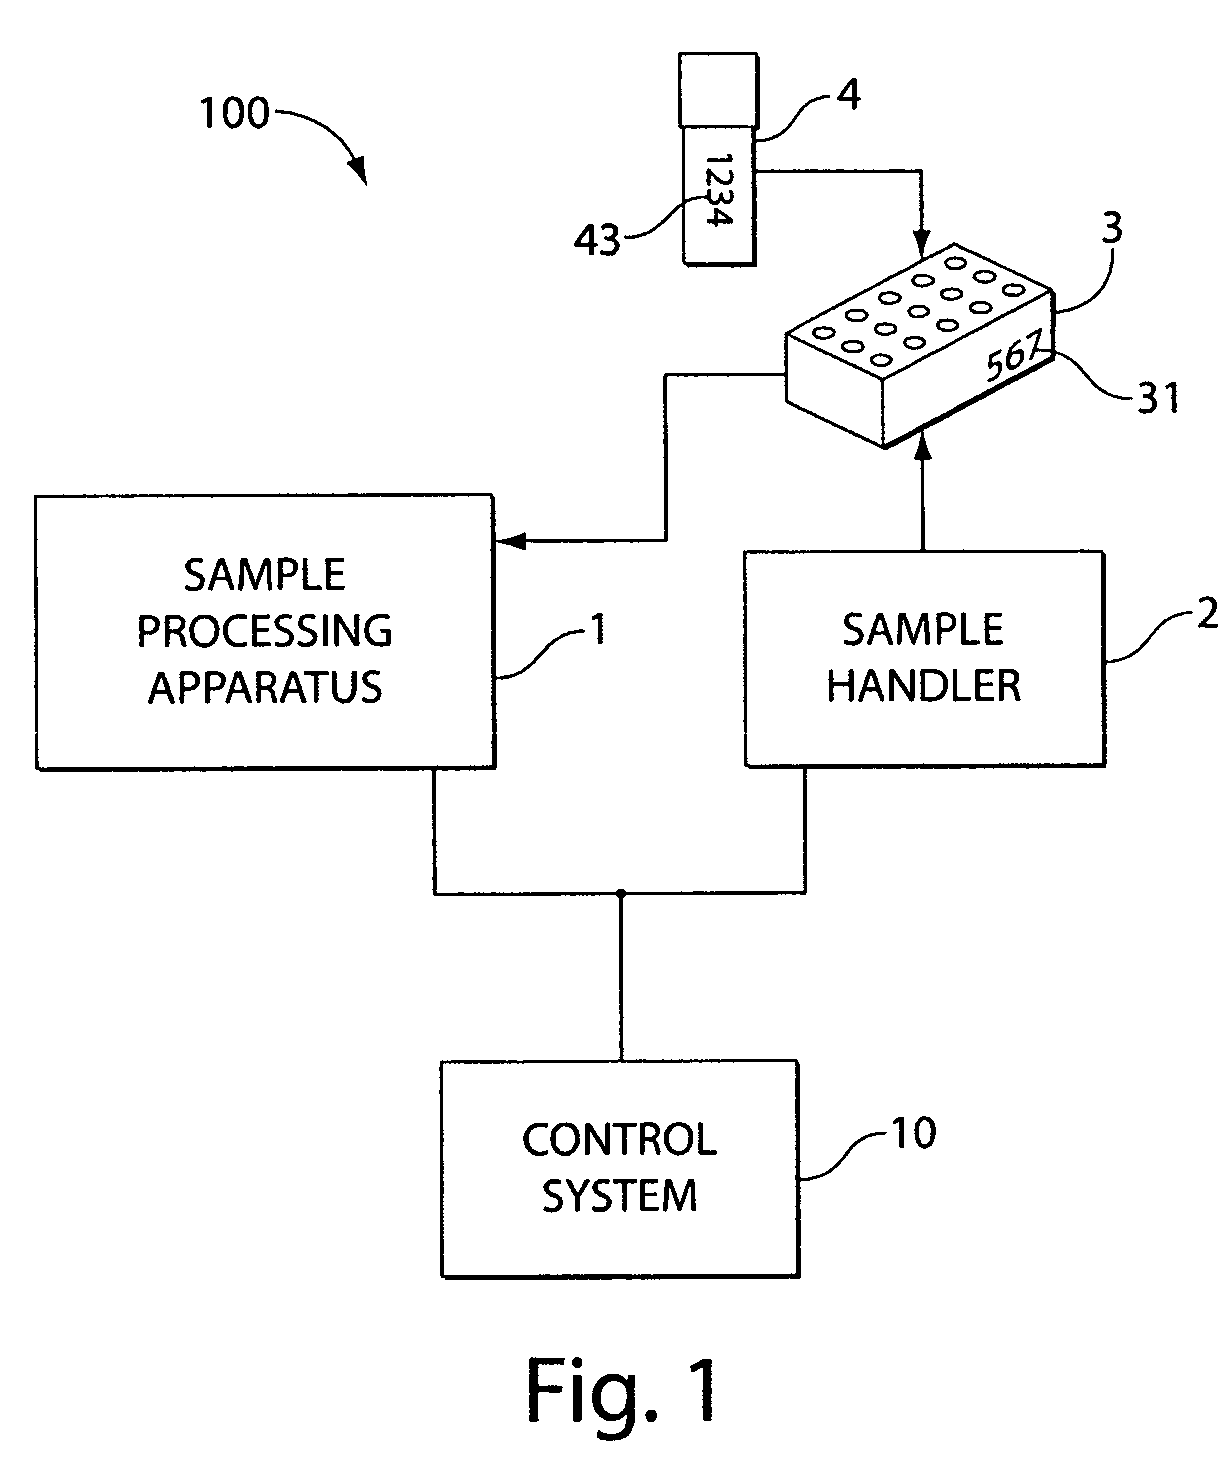 Method and apparatus for handling sample holders